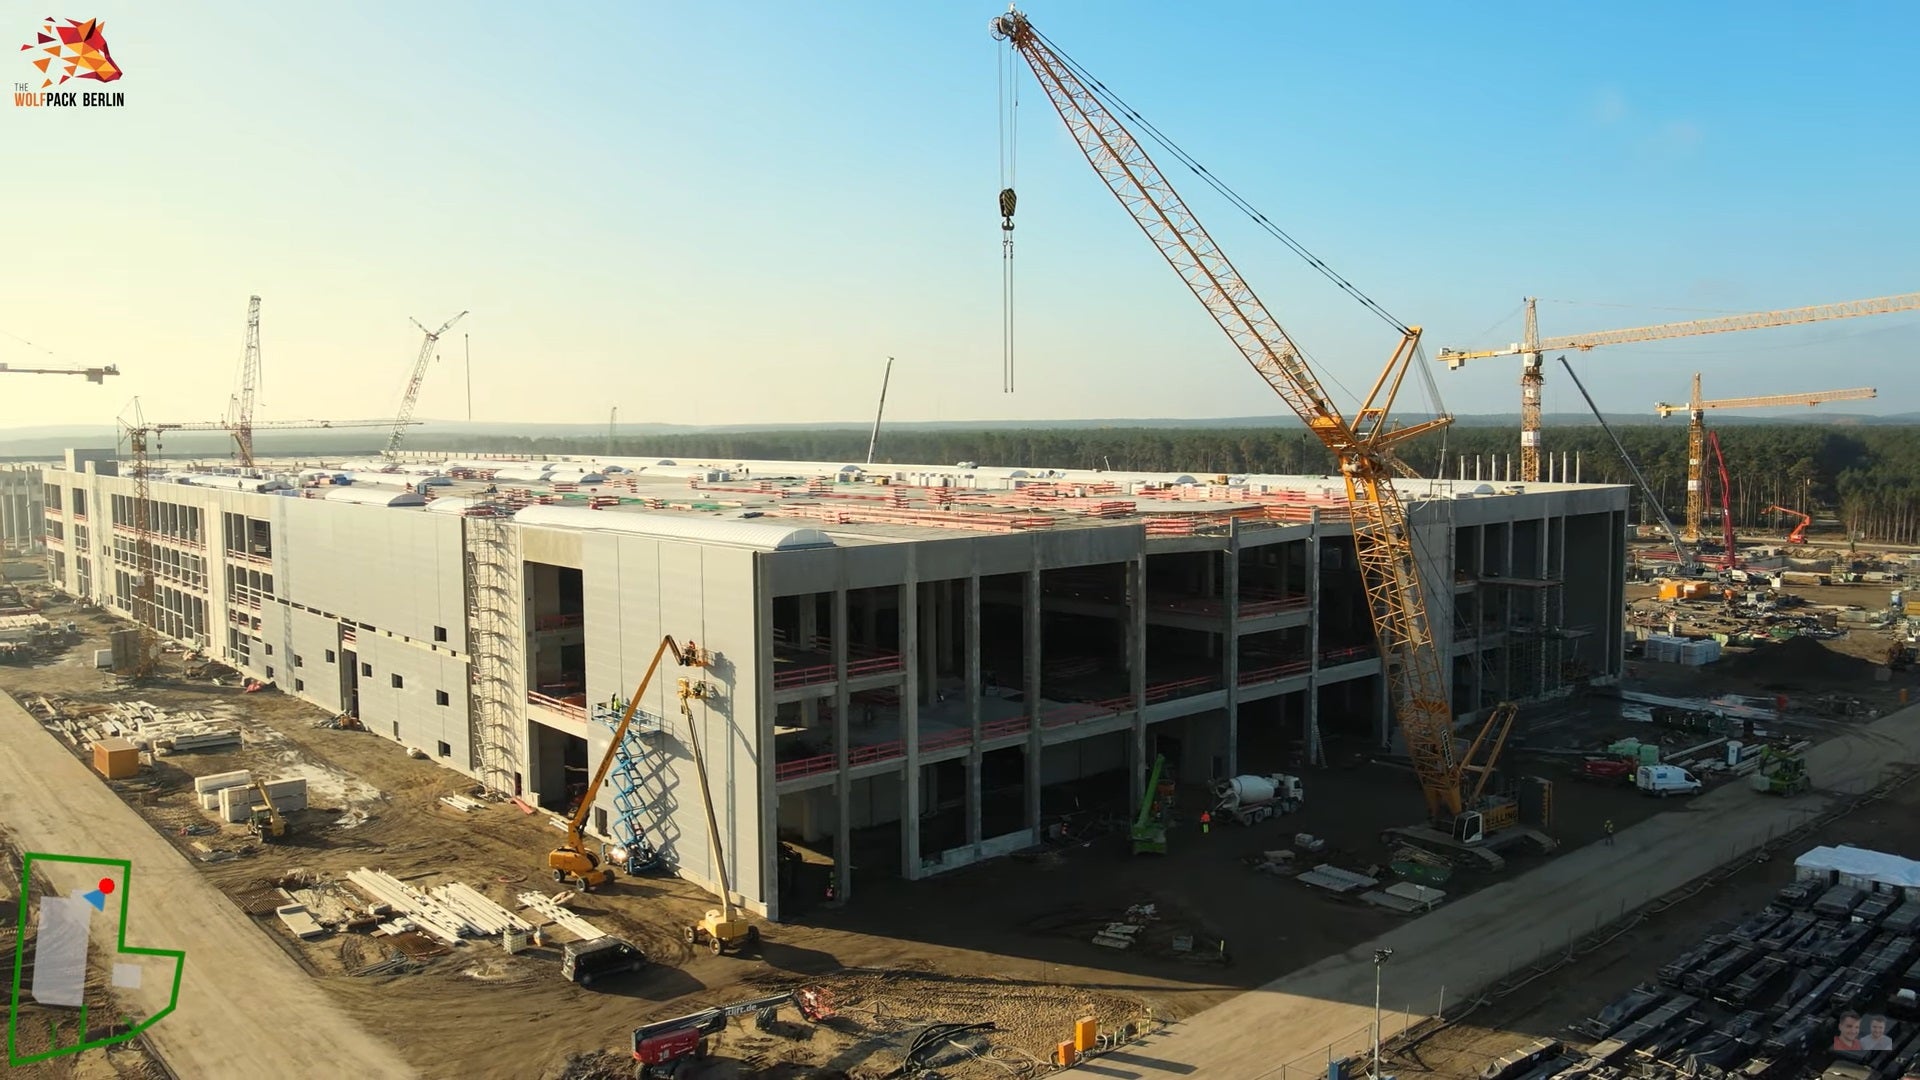 Tesla Giga Berlin Construction Advances, Production Remains Targeted for Mid-2021